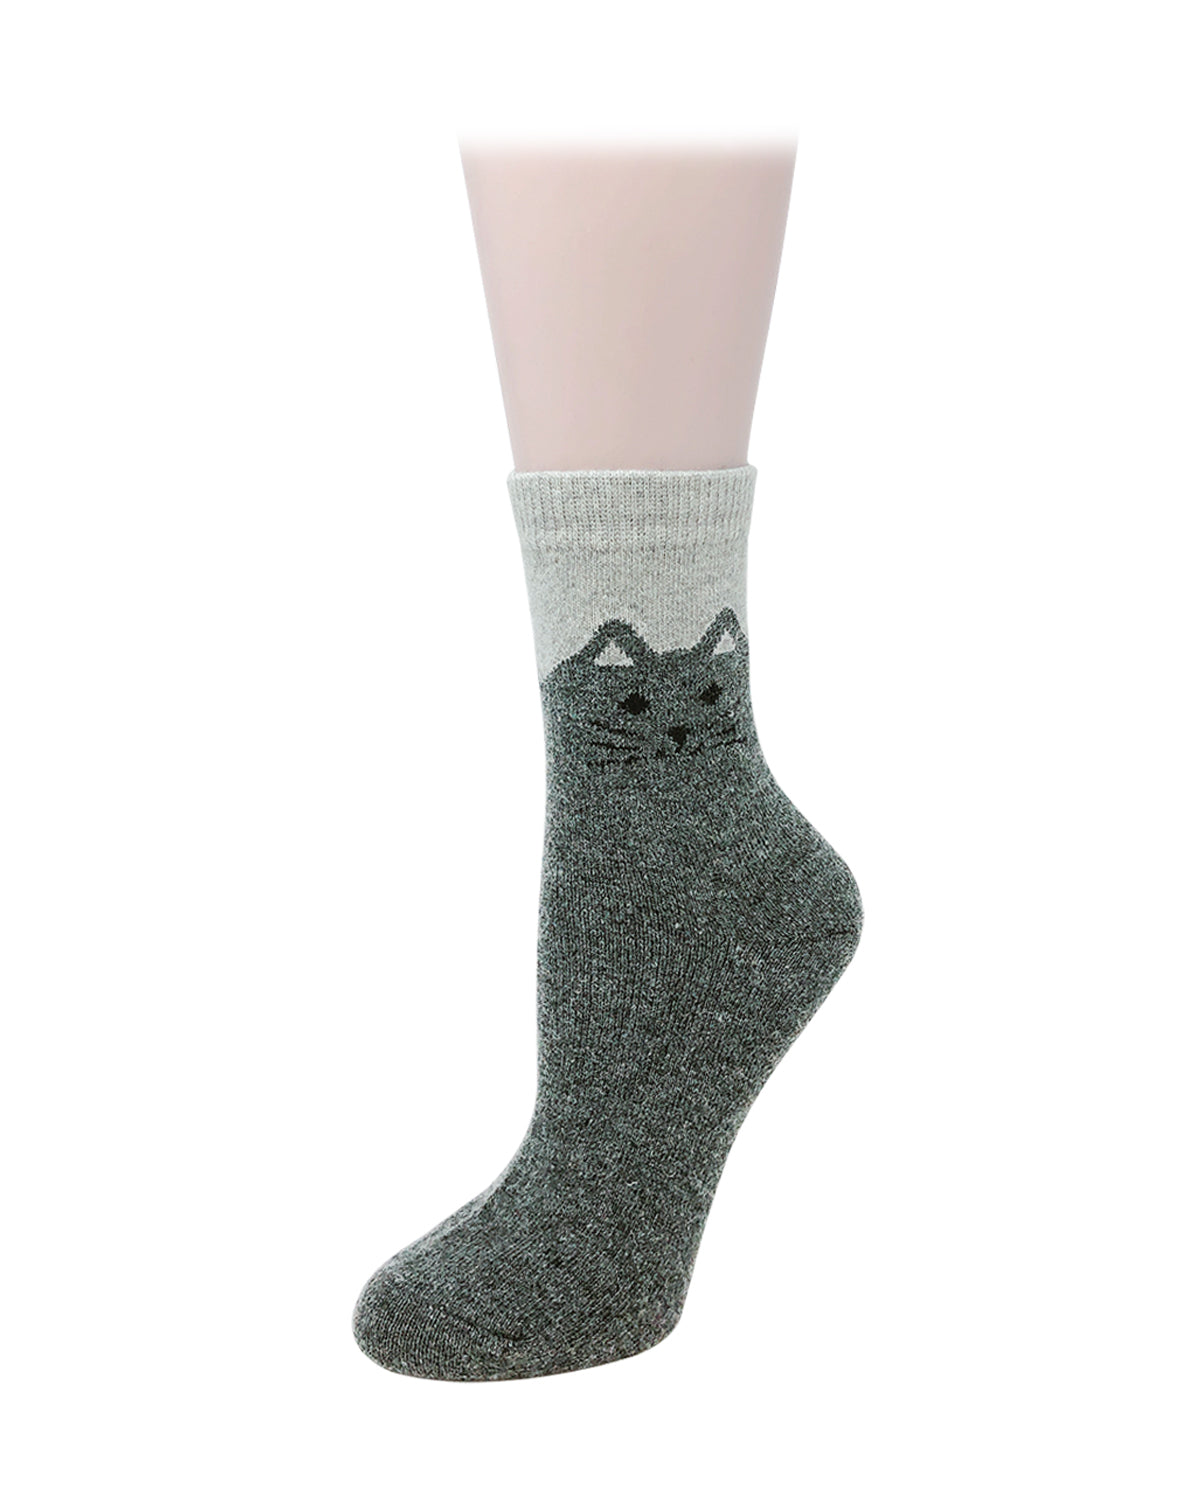 Wrapables Women's Thick Winter Warm Cat Print Wool Socks (Set of 5)